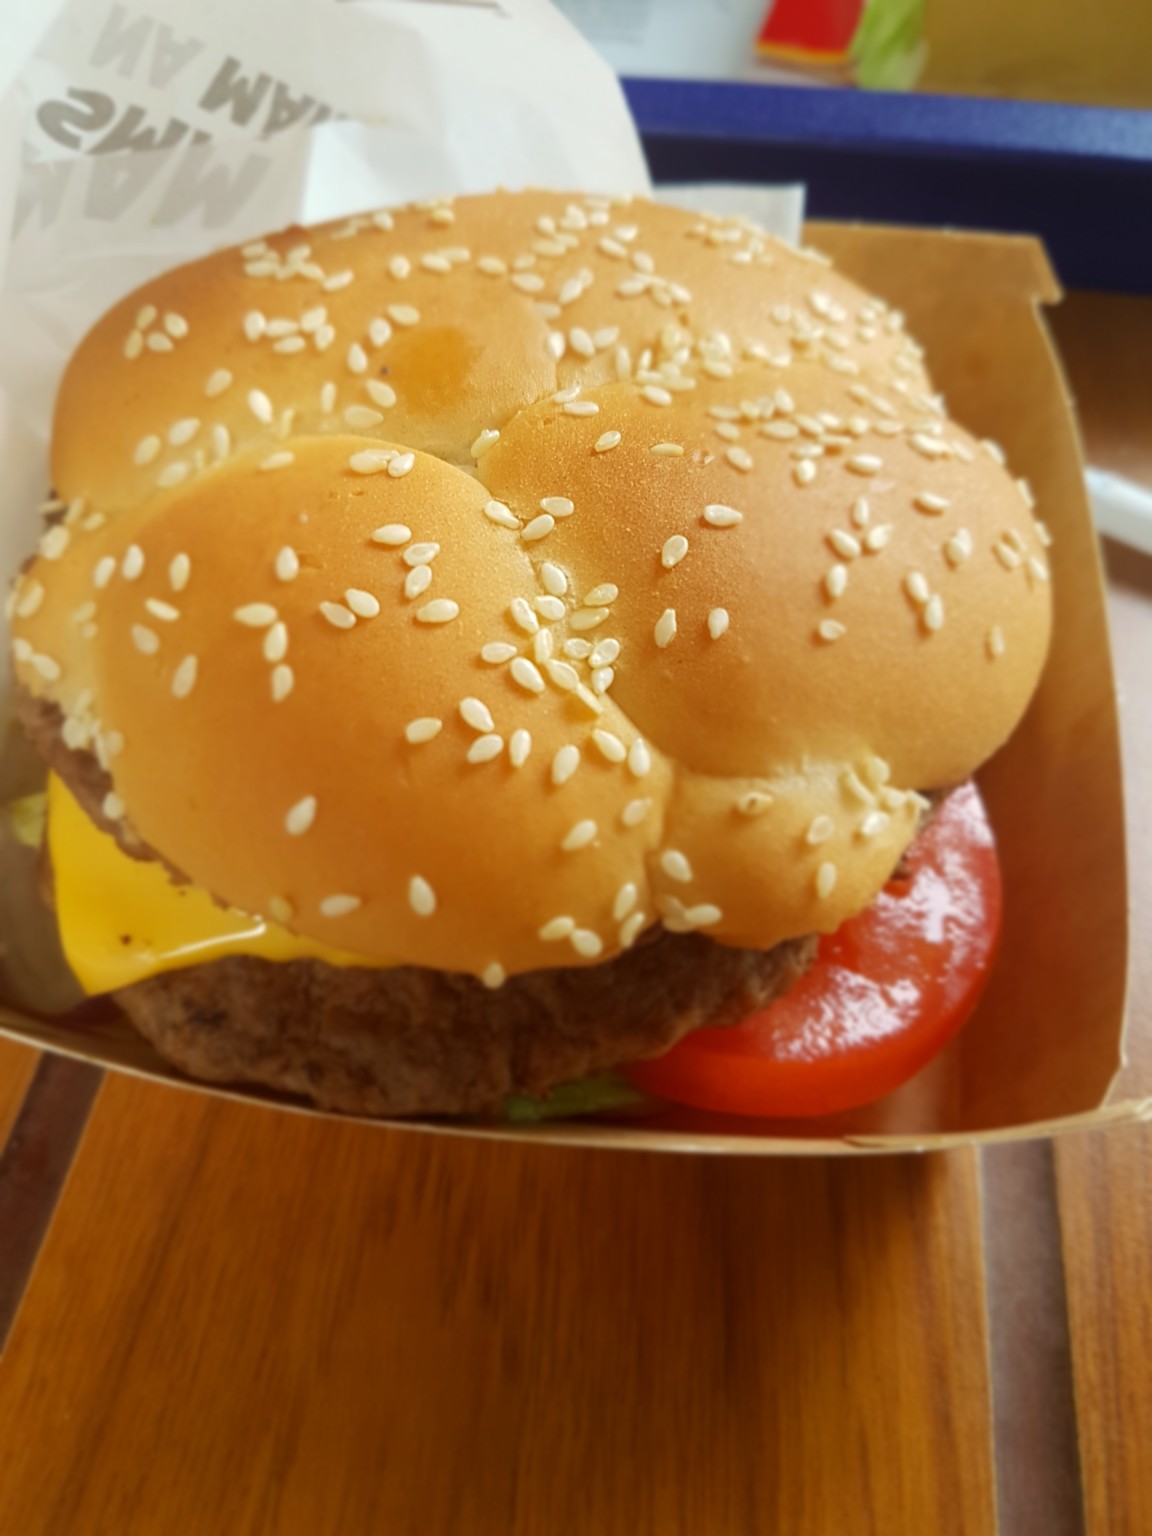 This is What a McDonald's Hamburger Should Look Like